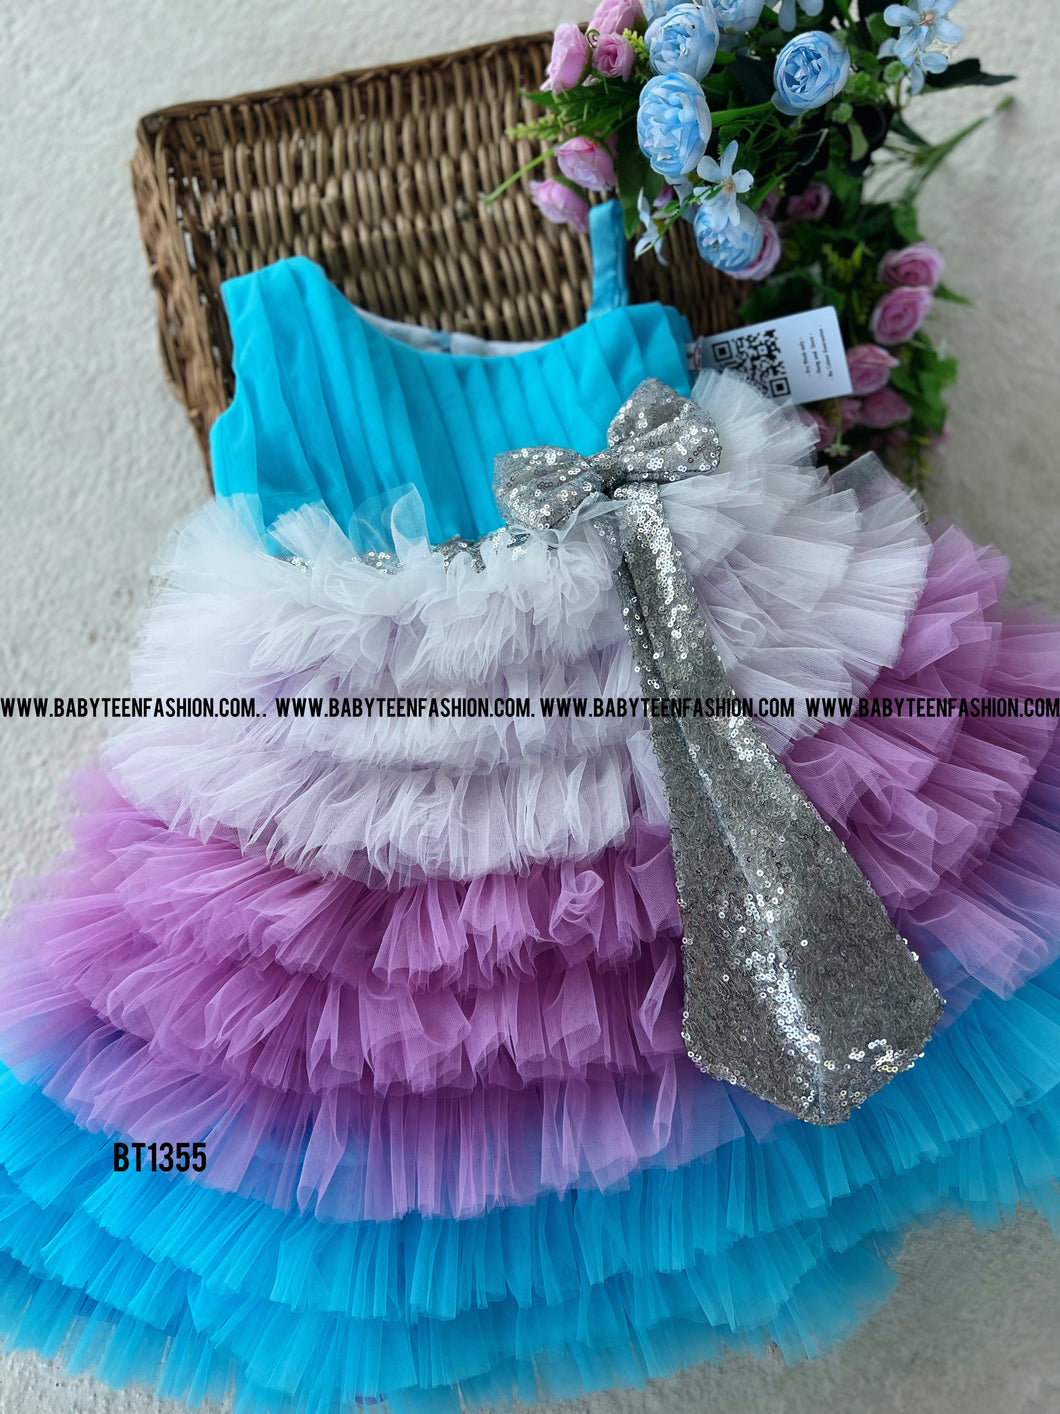 BT1355 Glittering Waterfall Party Dress - A Splash of Sparkle for Your Princess